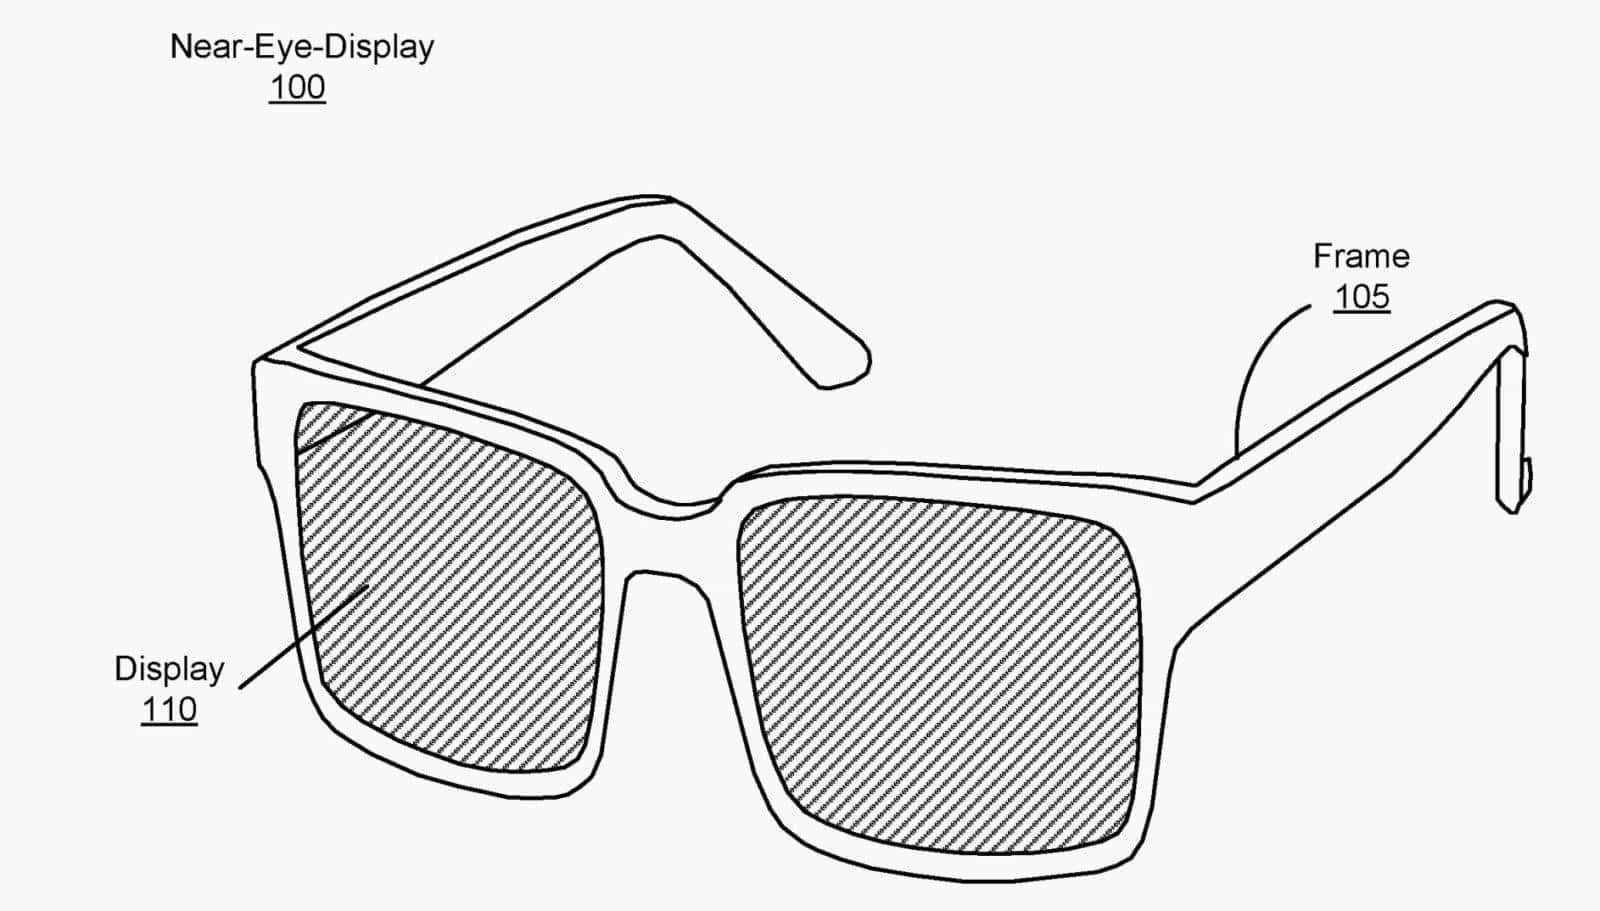 Facebook patents the design for their upcoming VR glass